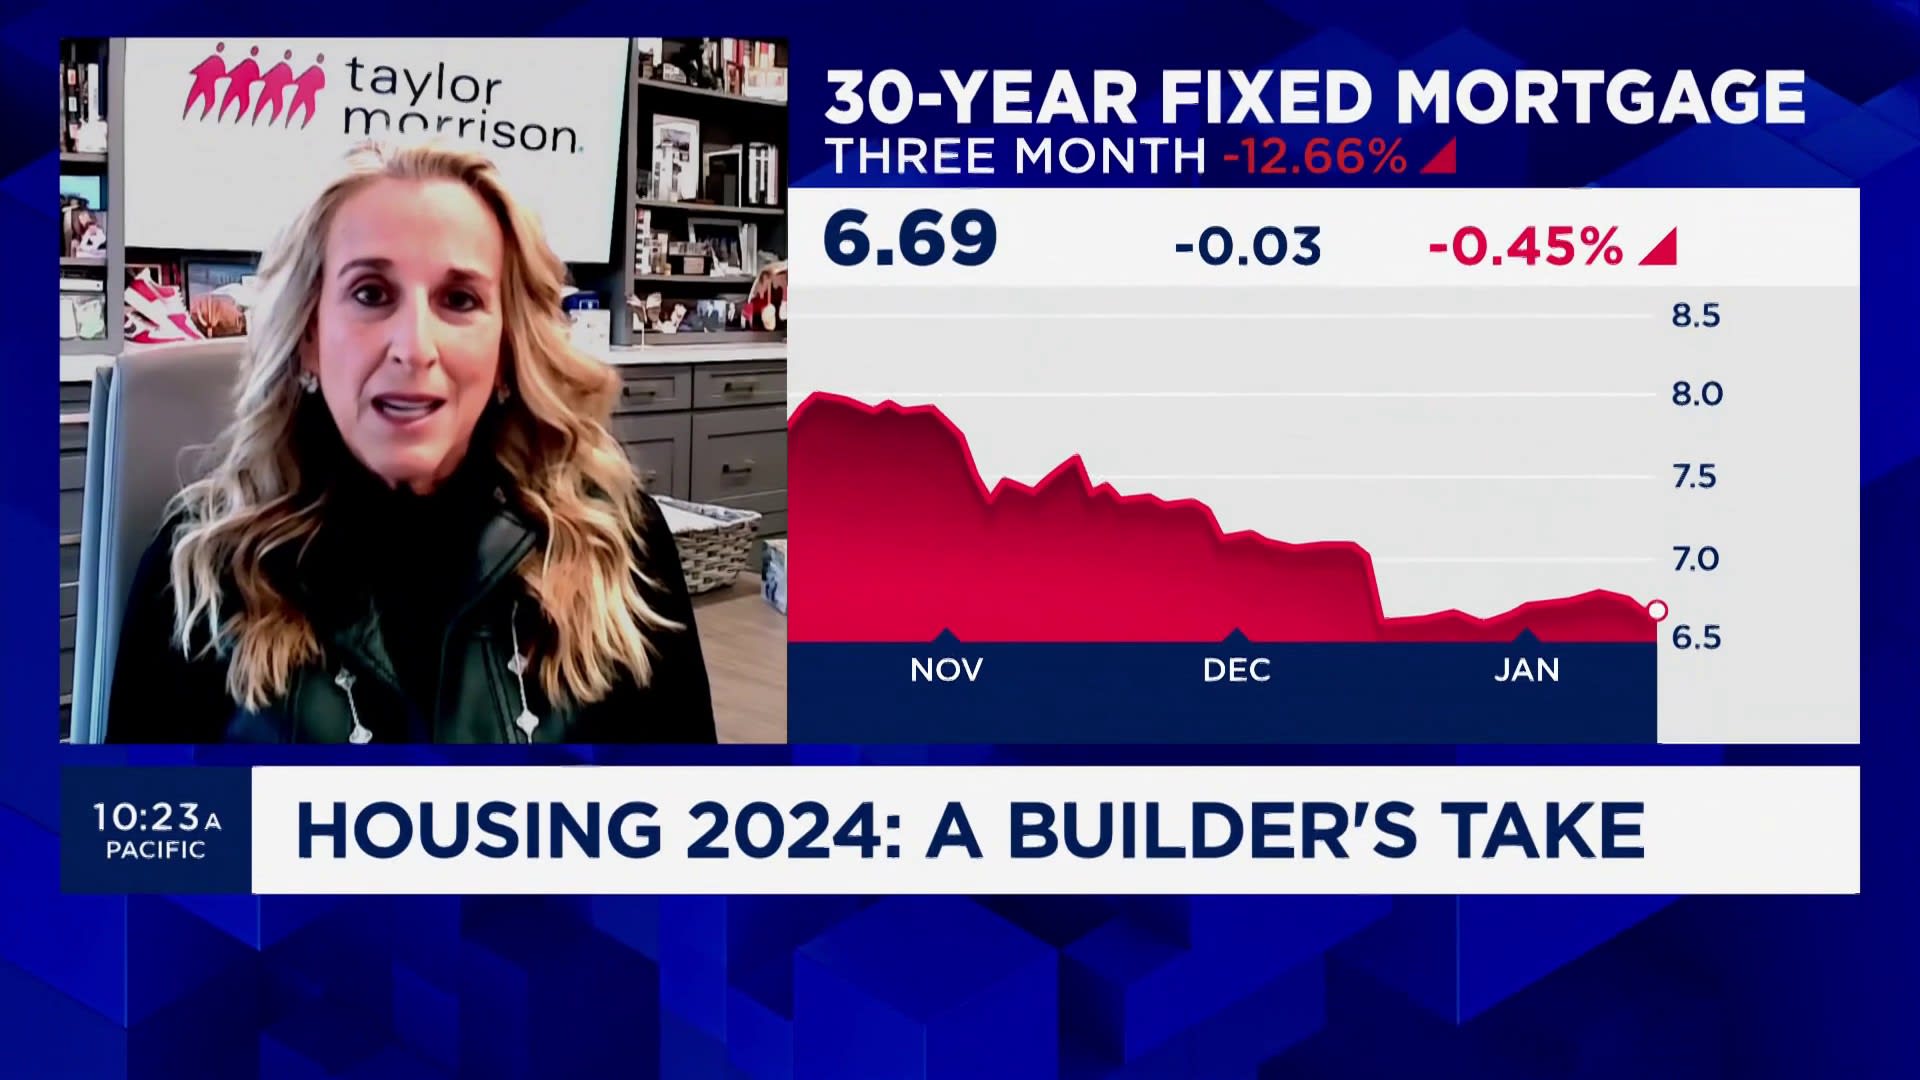 New home market projected to experience positive growth, says Taylor Morrison CEO Sheryl Palmer